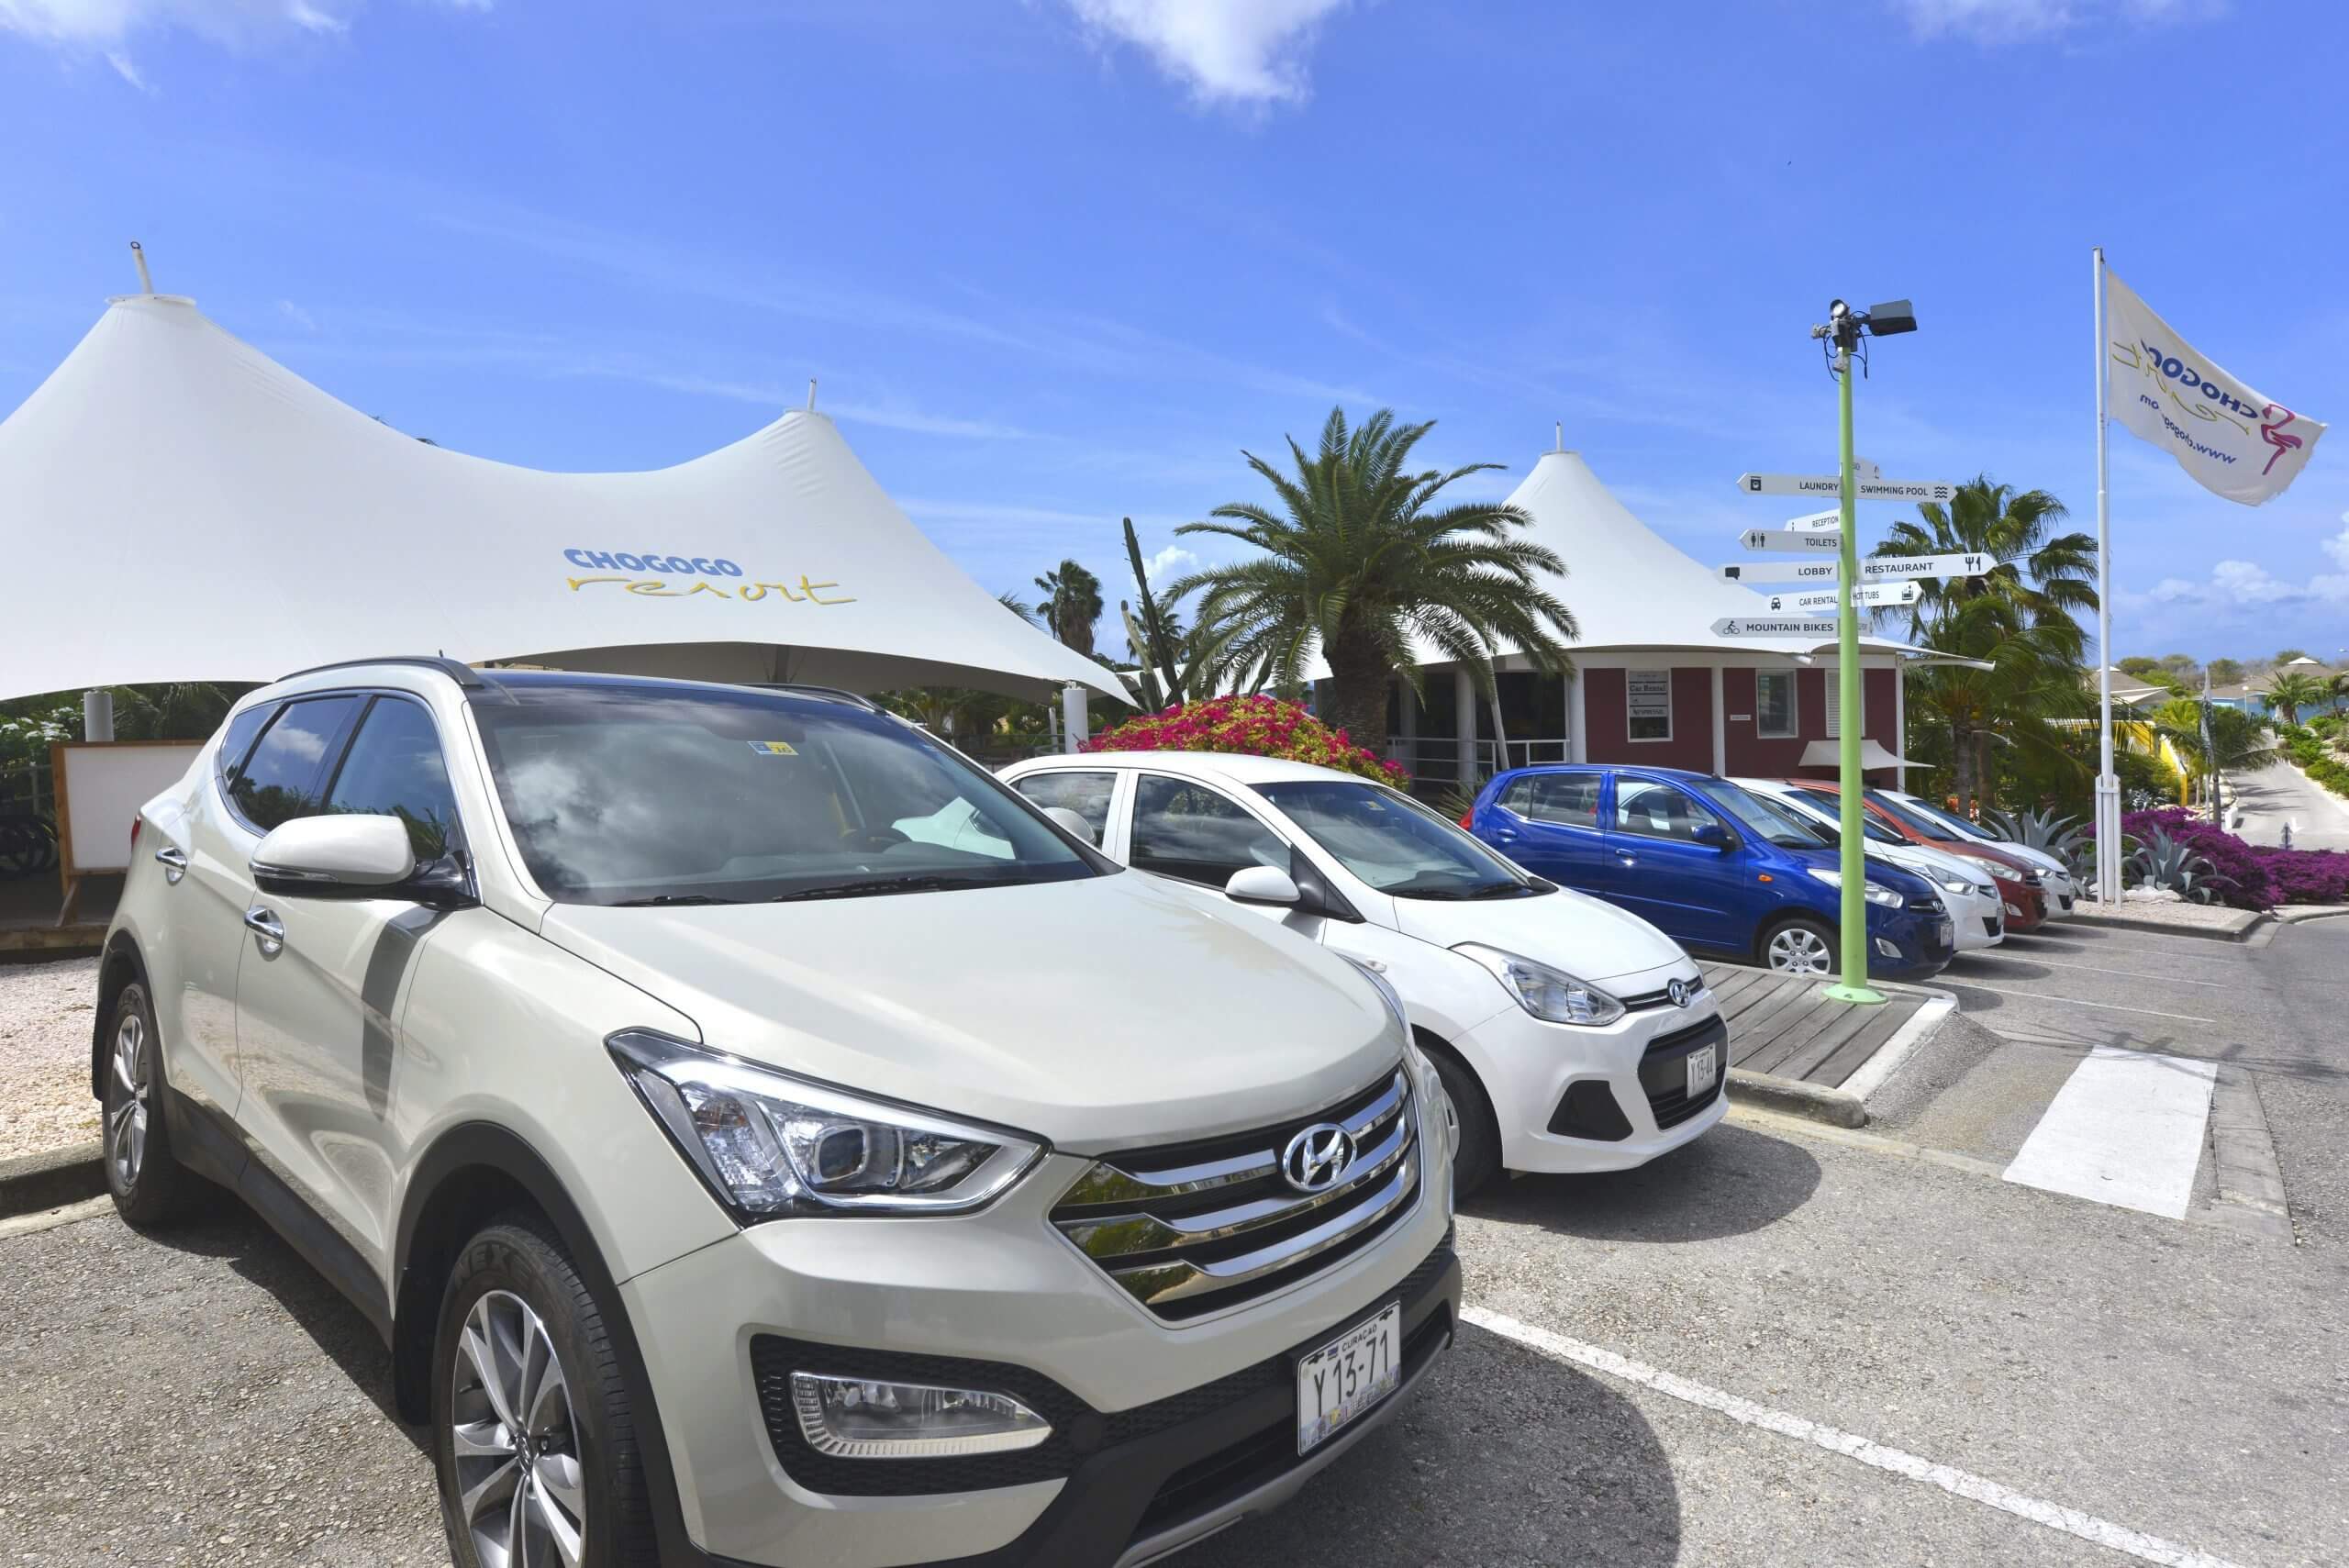 Chogogo Curacao car rental service, with different car options.